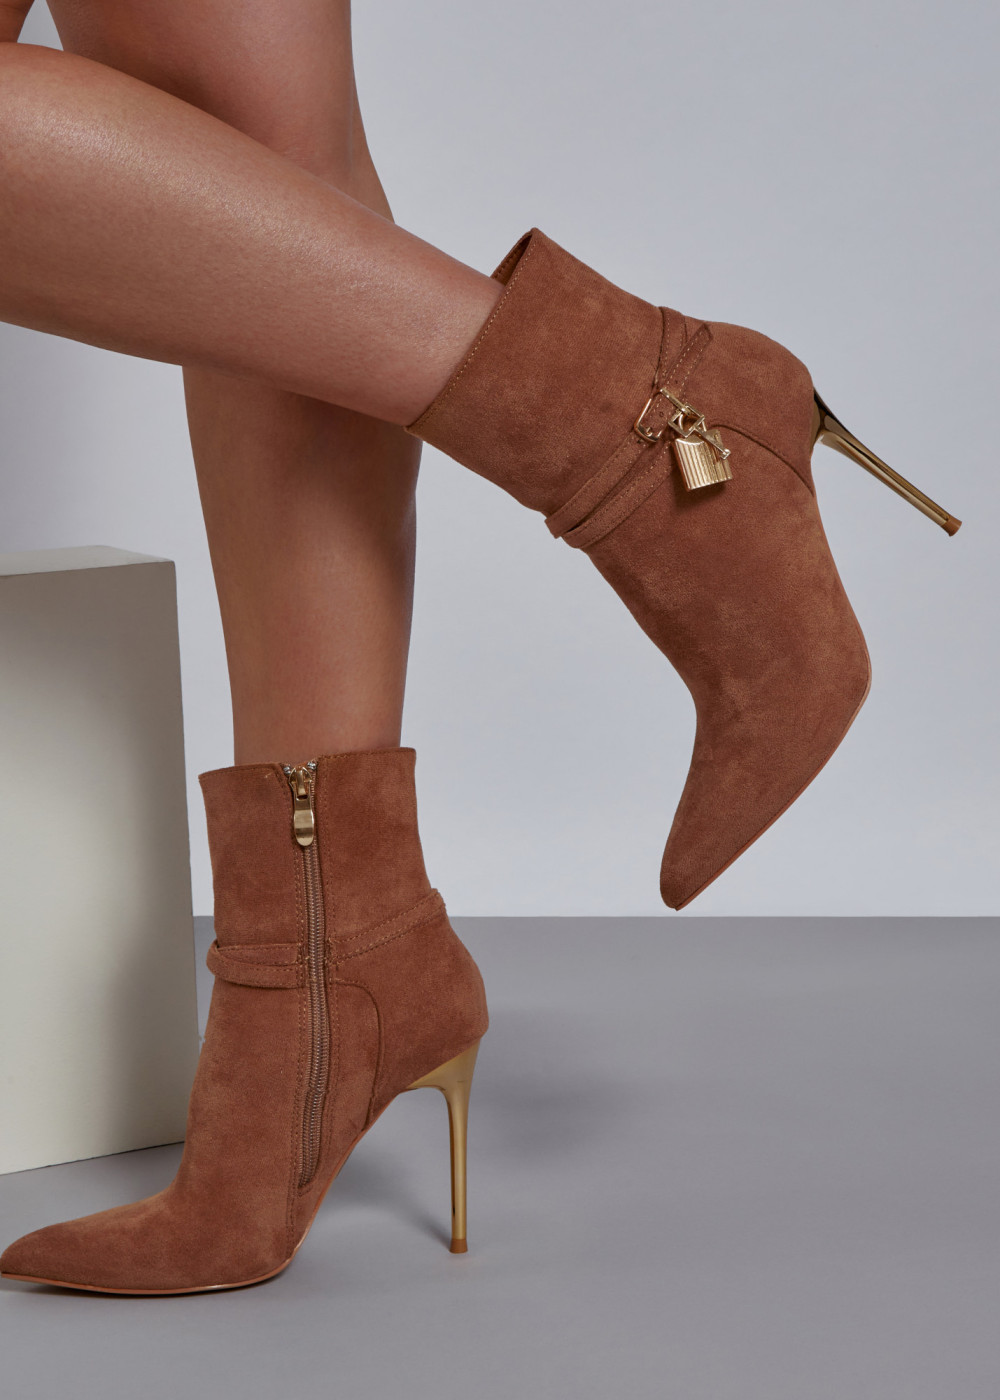 Tan pointed toe stiletto style ankle boots 4